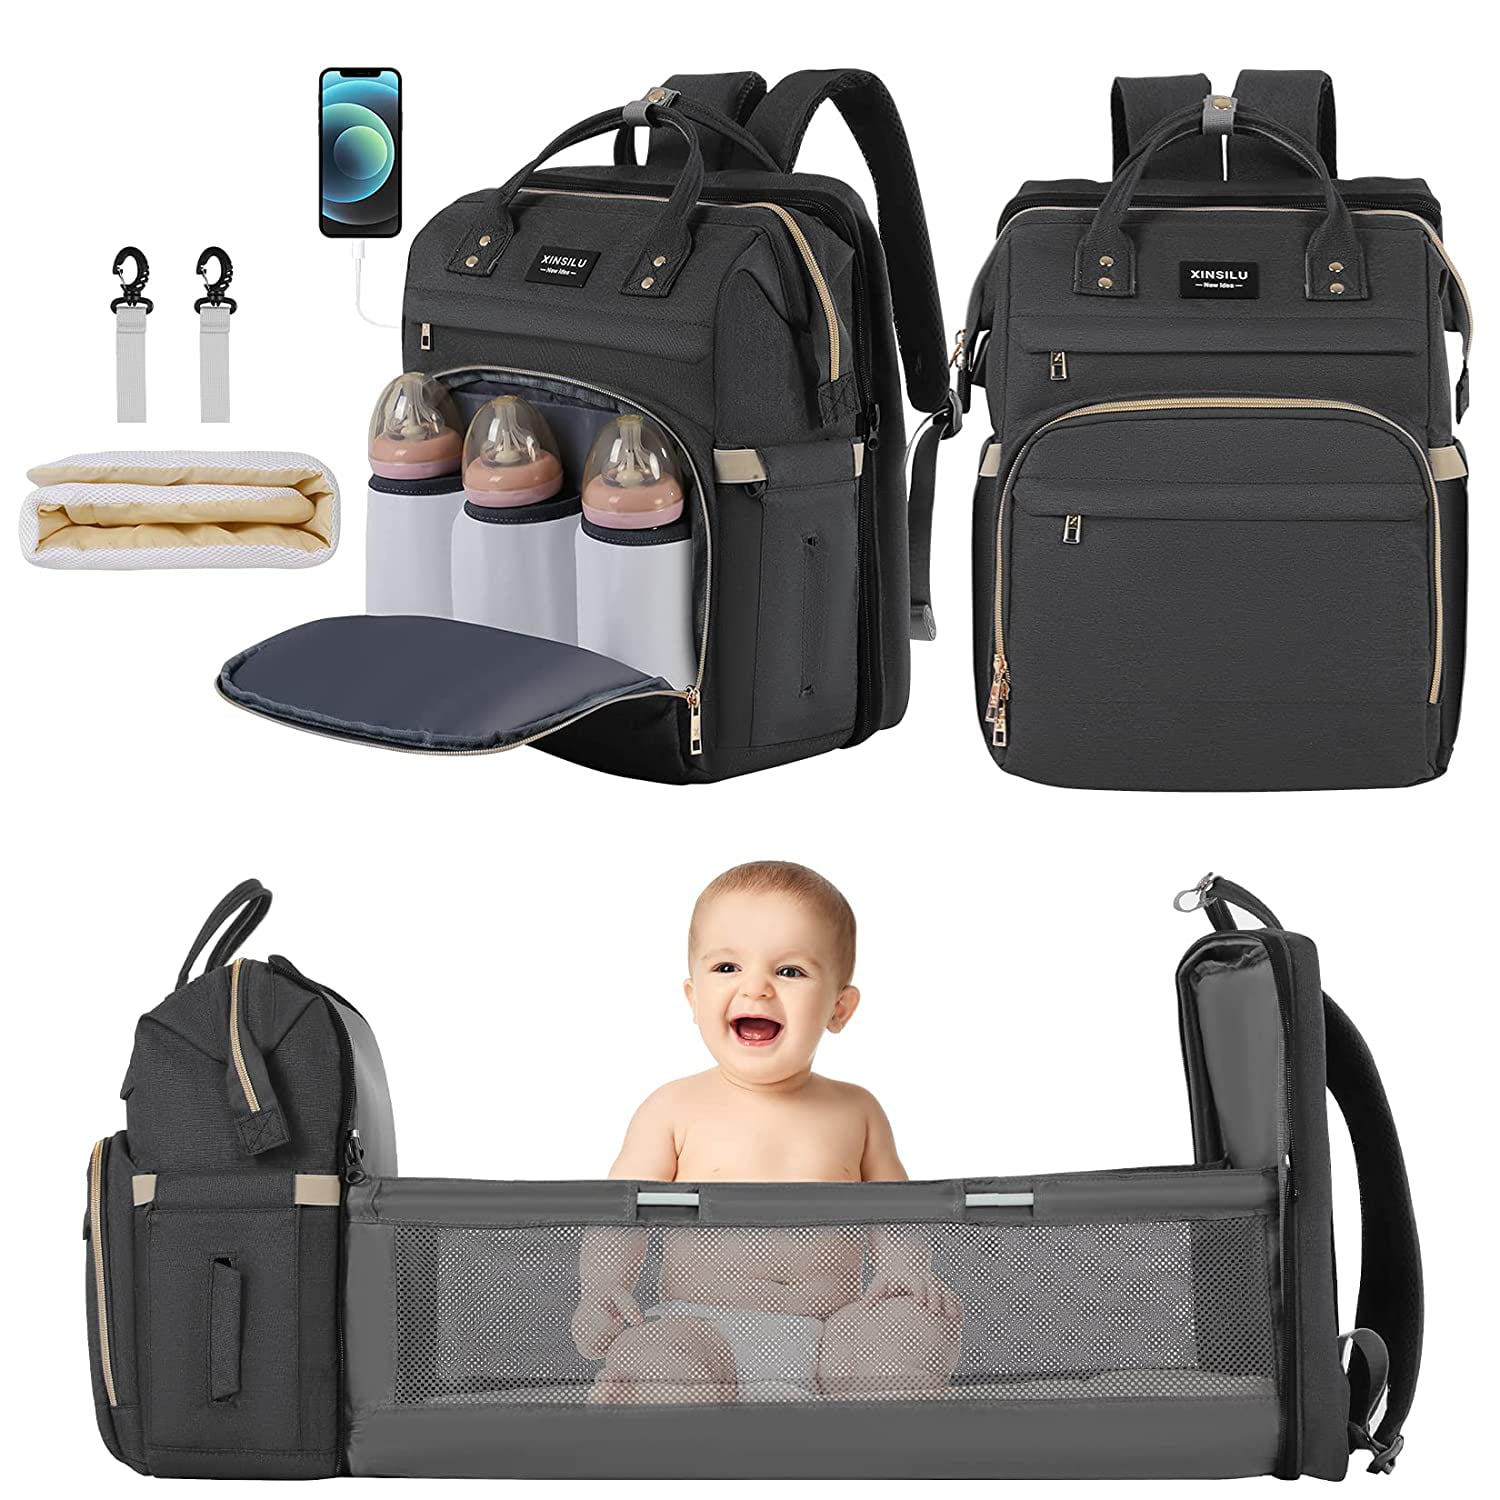 XINSILU Diaper Bag Backpack with Changing Station Portable FoldableMommy Bag Diaper Bag for Baby Girls Boys Light Gray Newborn Registry BabyShower Gifts Essentials Items Baby Stuff 